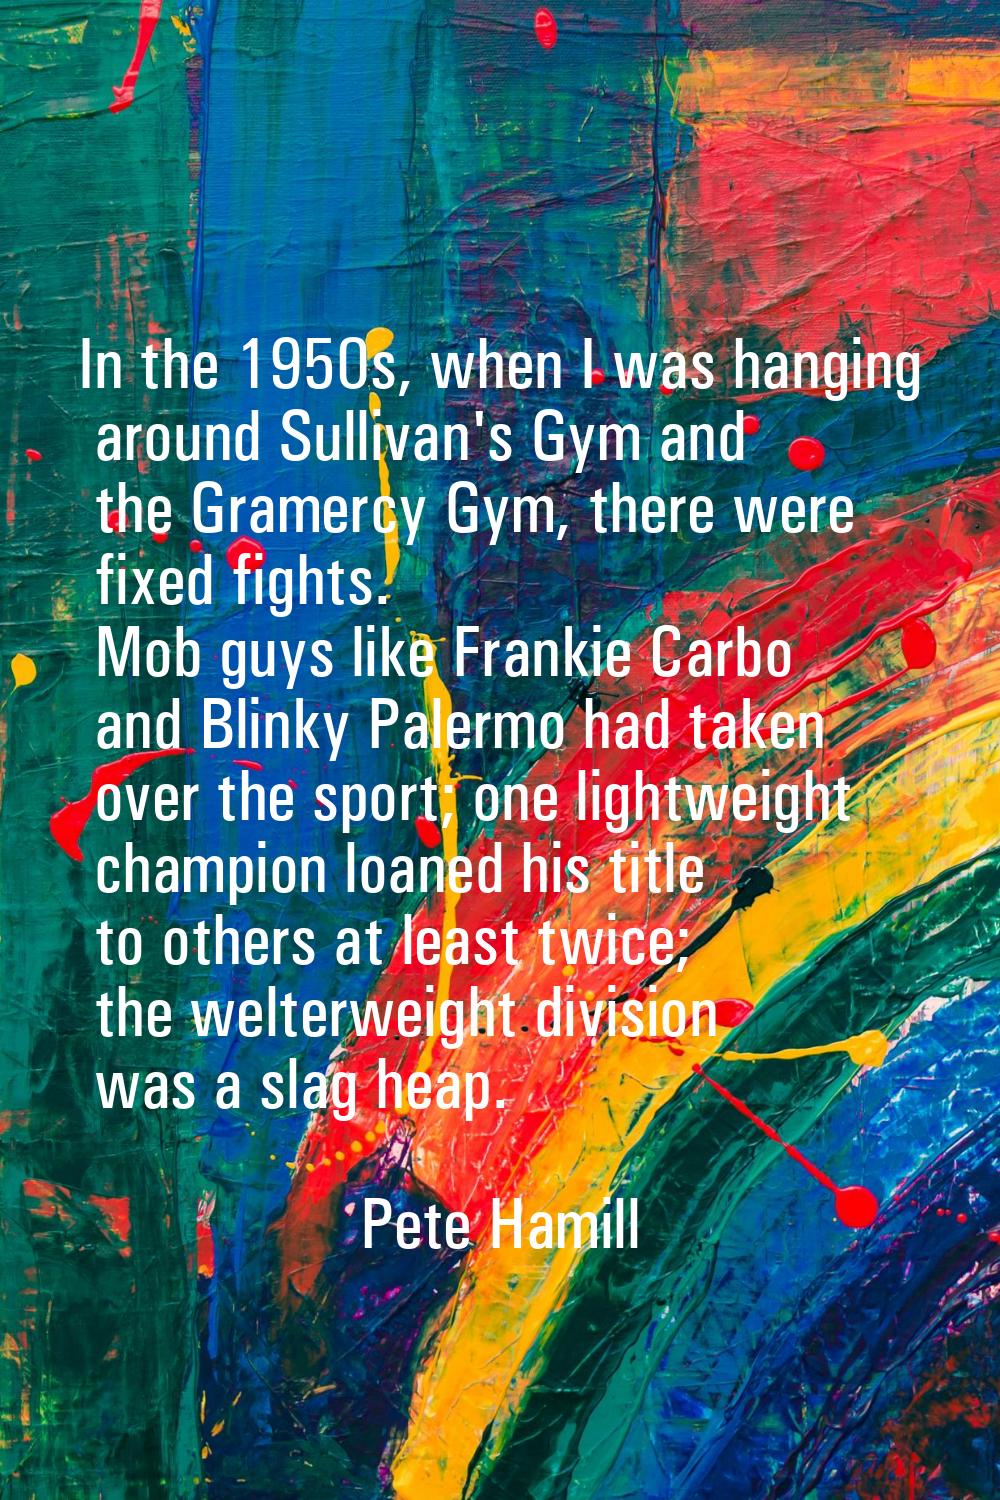 In the 1950s, when I was hanging around Sullivan's Gym and the Gramercy Gym, there were fixed fight